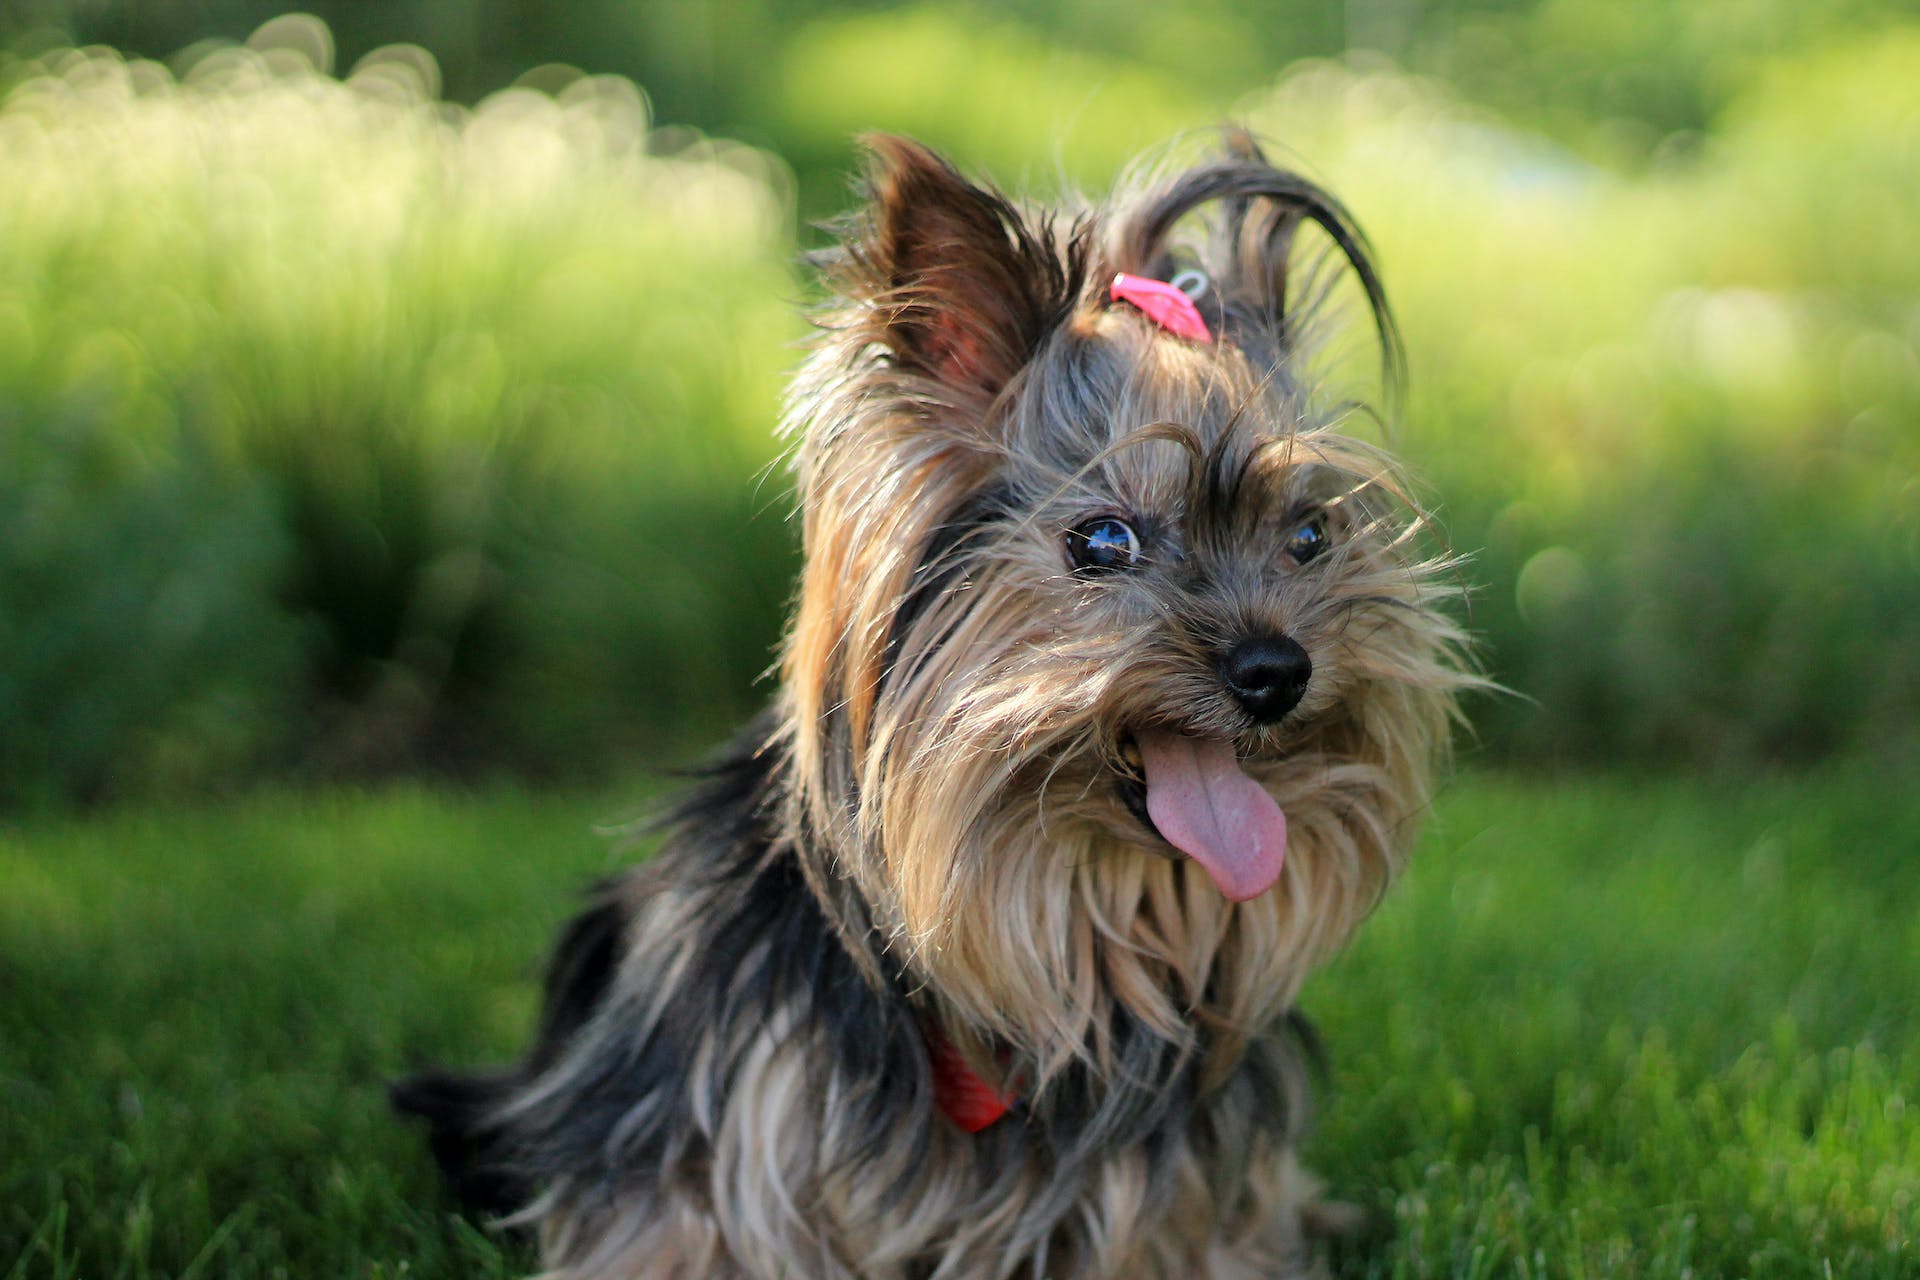 A Yorkshire terrier sitting in a grassy lawn